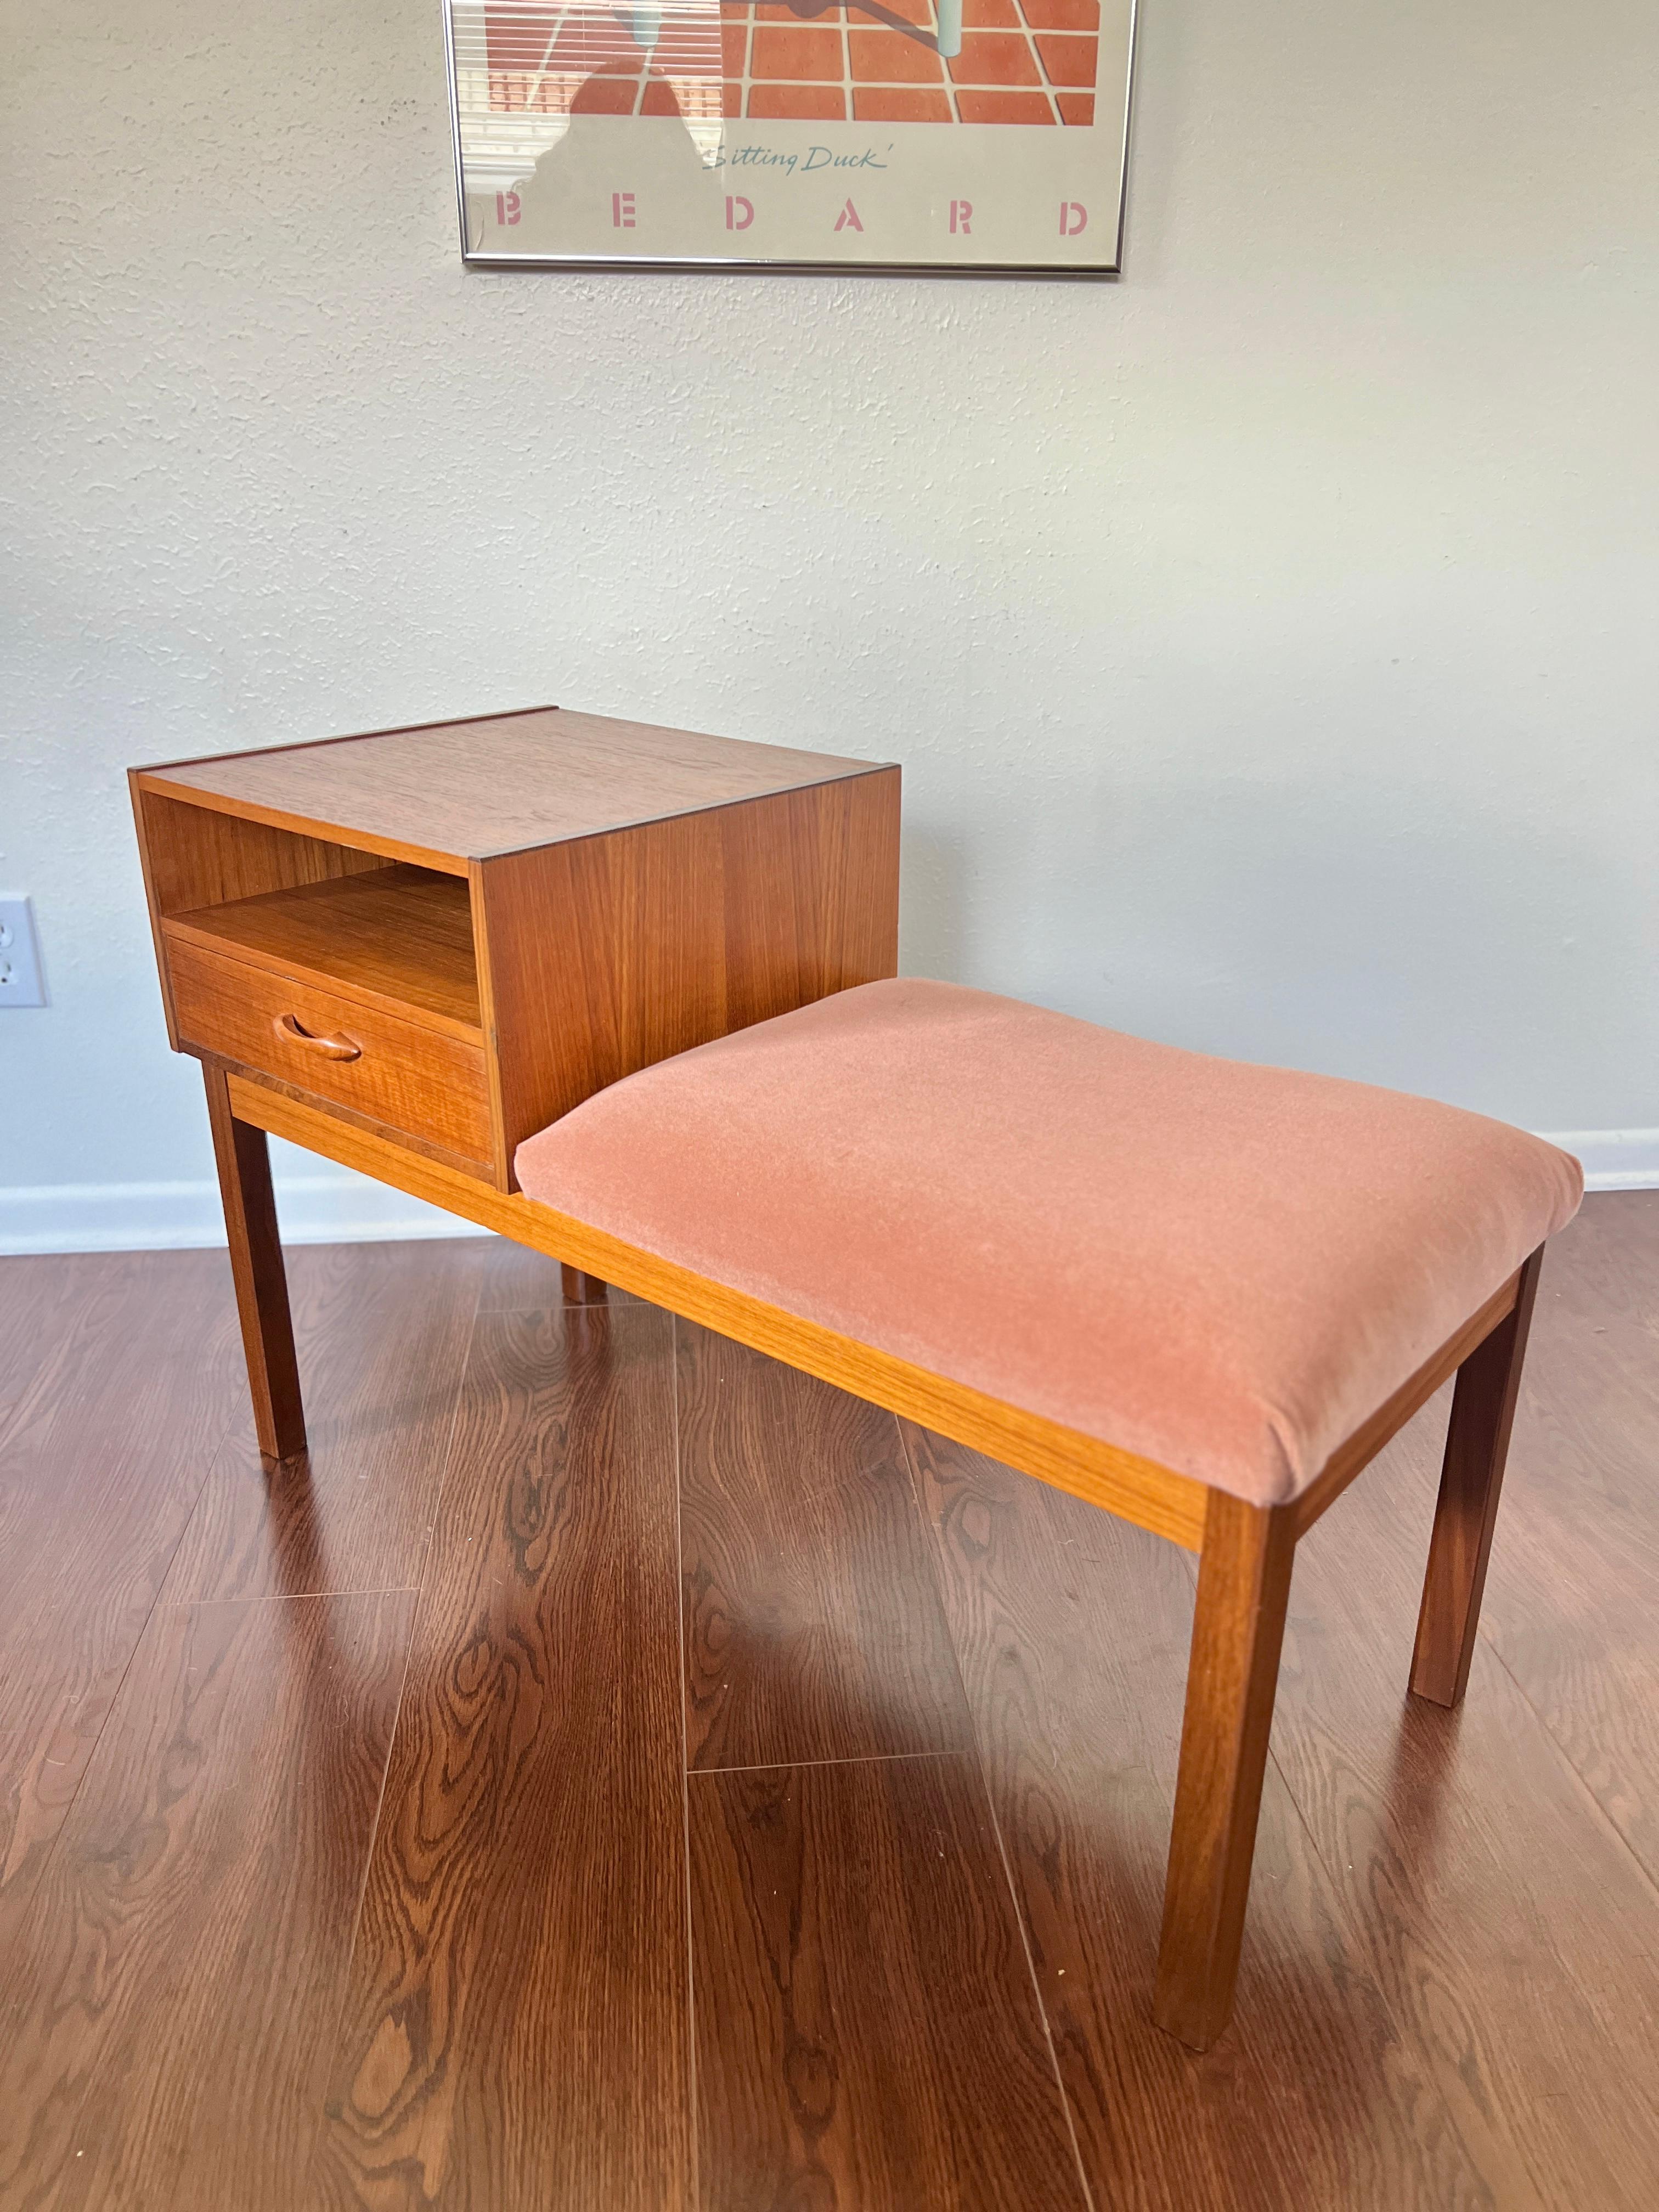 This mid century modern telephone bench circa 1960s has a wonderful design and minimalist feel. Newly refinished and reupholstered in a pink mohair. Perfect for an entryway or in the living room as a lamp table. In very good condition.